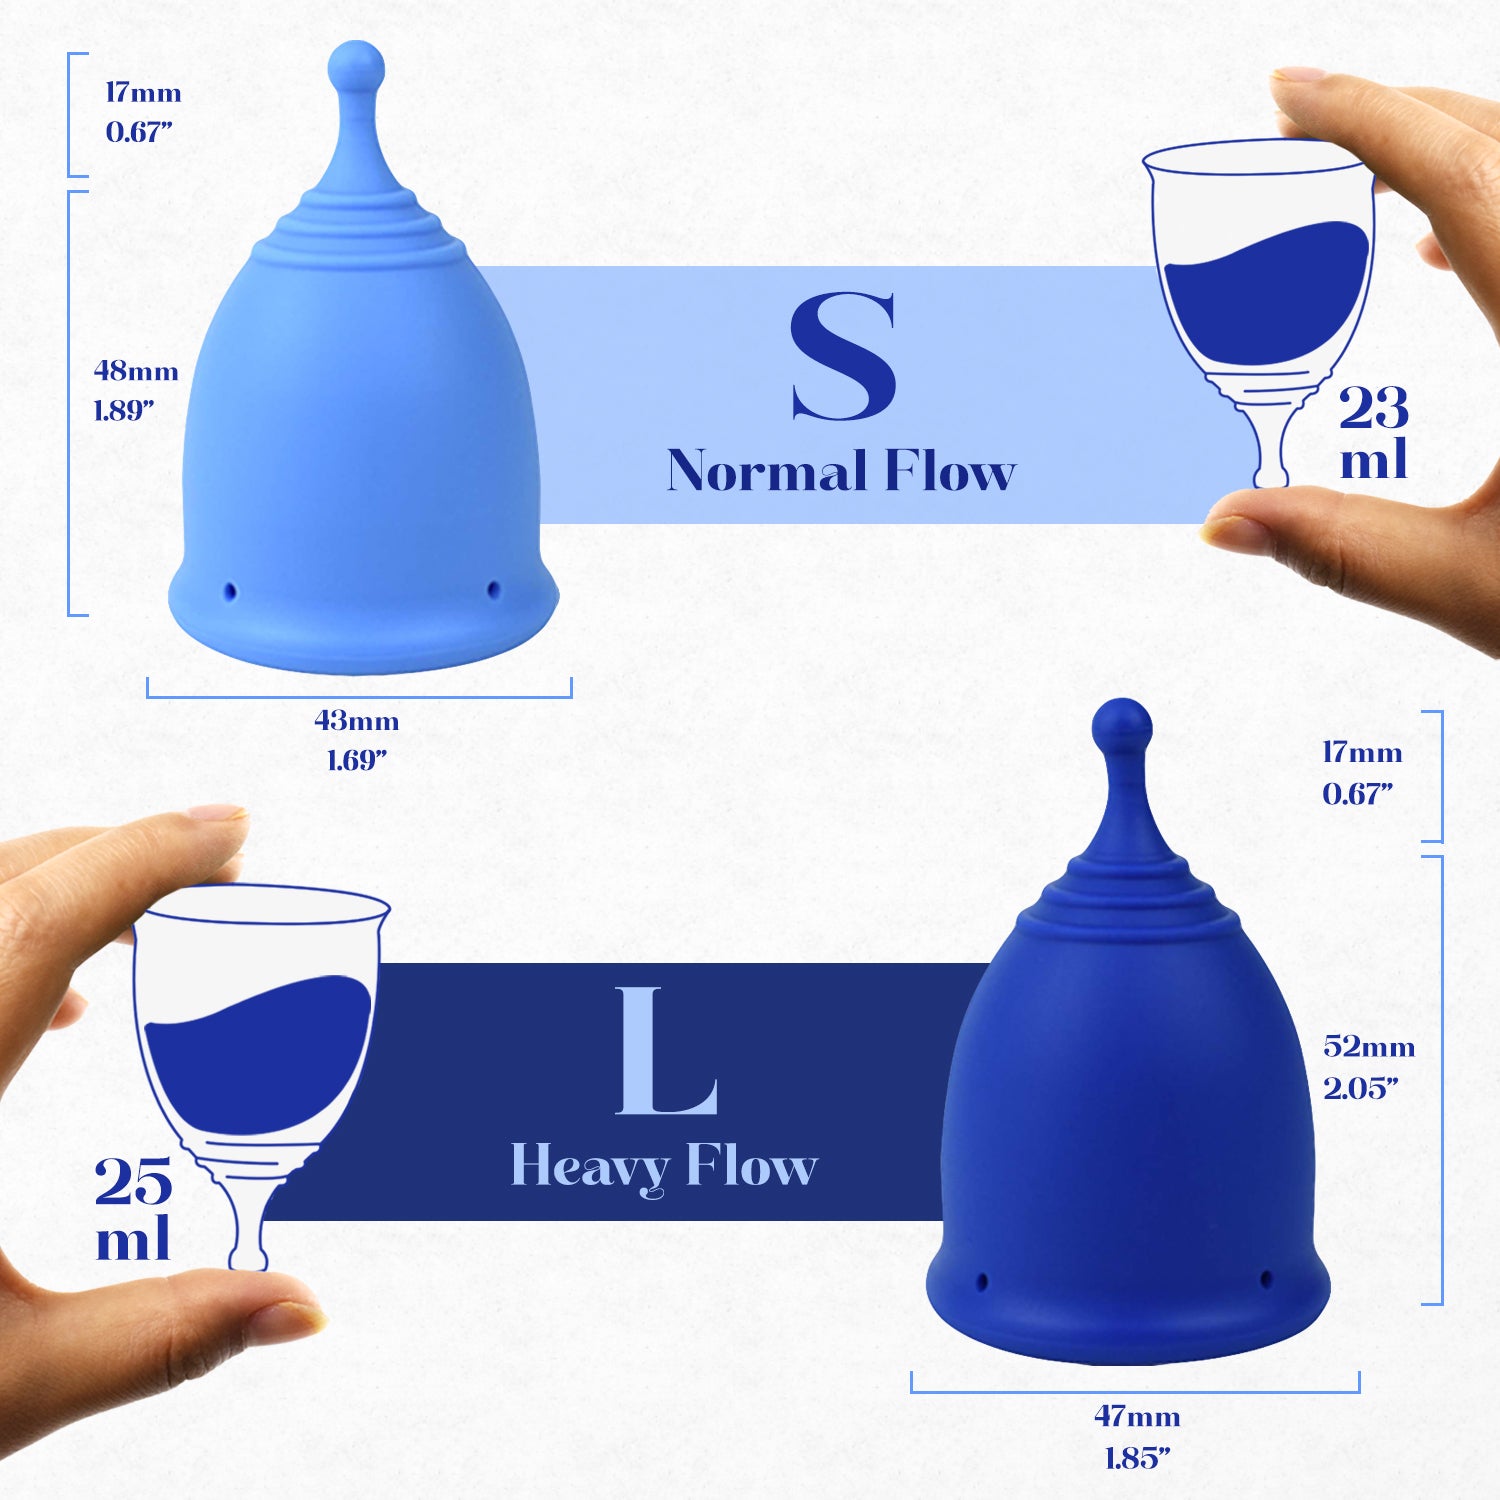 SHORDY Reusable Menstrual Cup (Small) Set of 2 with Mini Box, 100% Soft  Silicone, Coupe Menstruelle, Safe Period Cup, Light Flow Kit, Feminine  Hygiene, Tampons, Pads & Disc Alternative (Green) : 